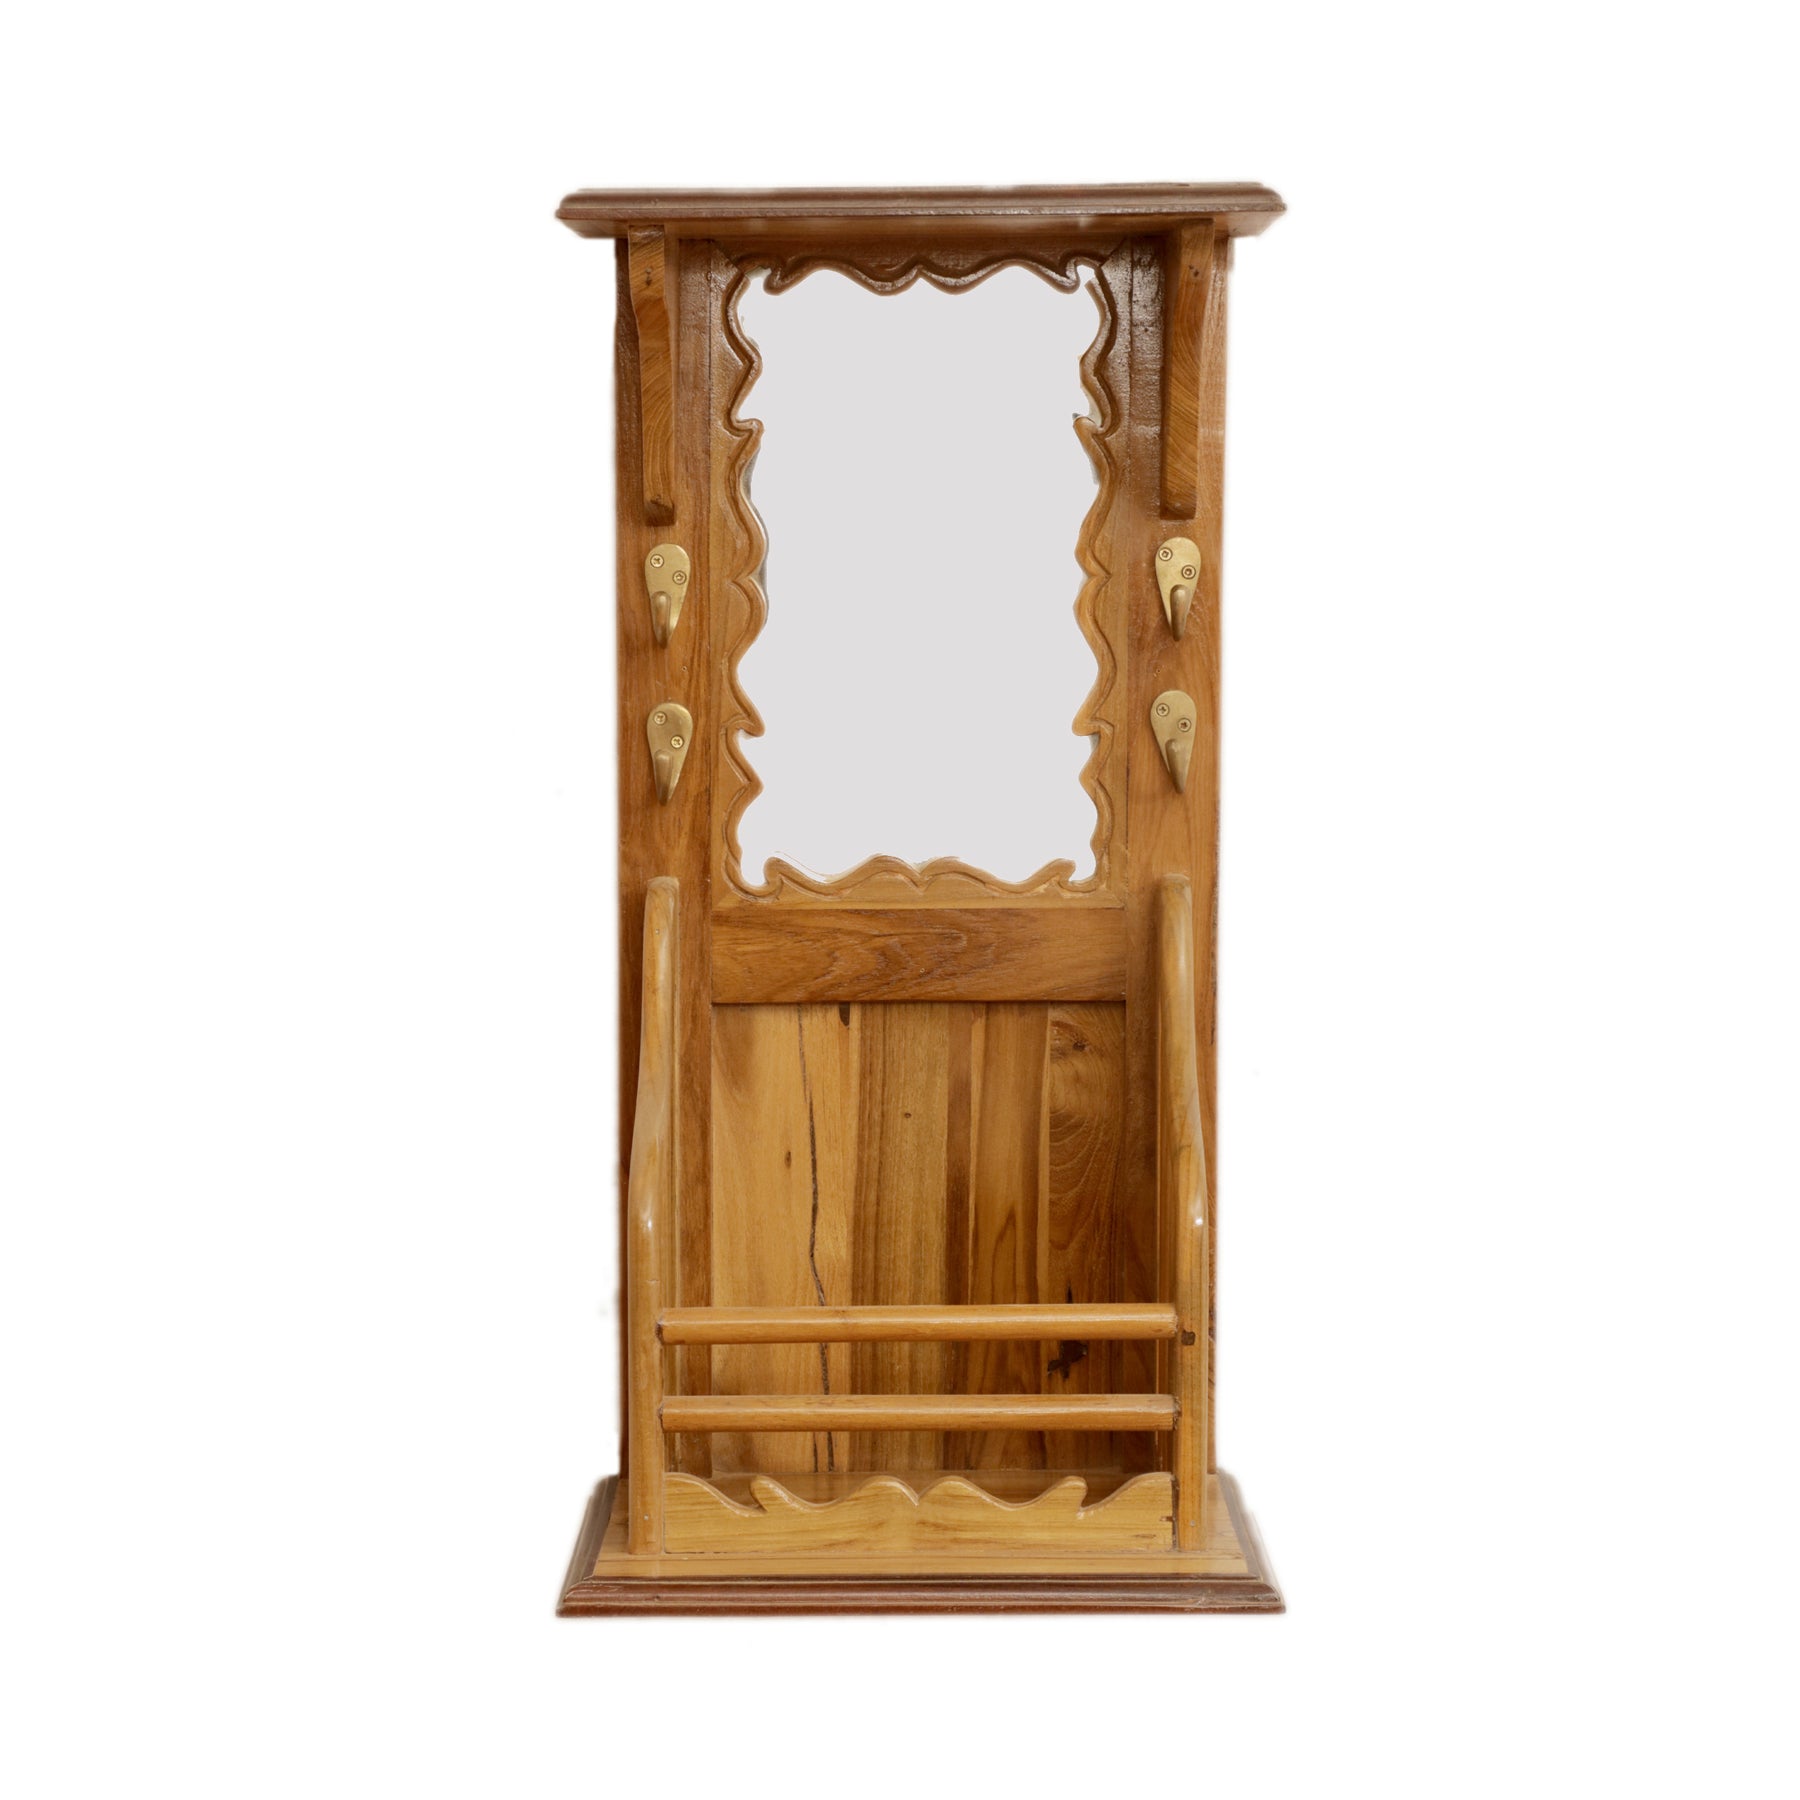 Wooden Hanging Cabinet with Hooks and Mirror Paper Holder